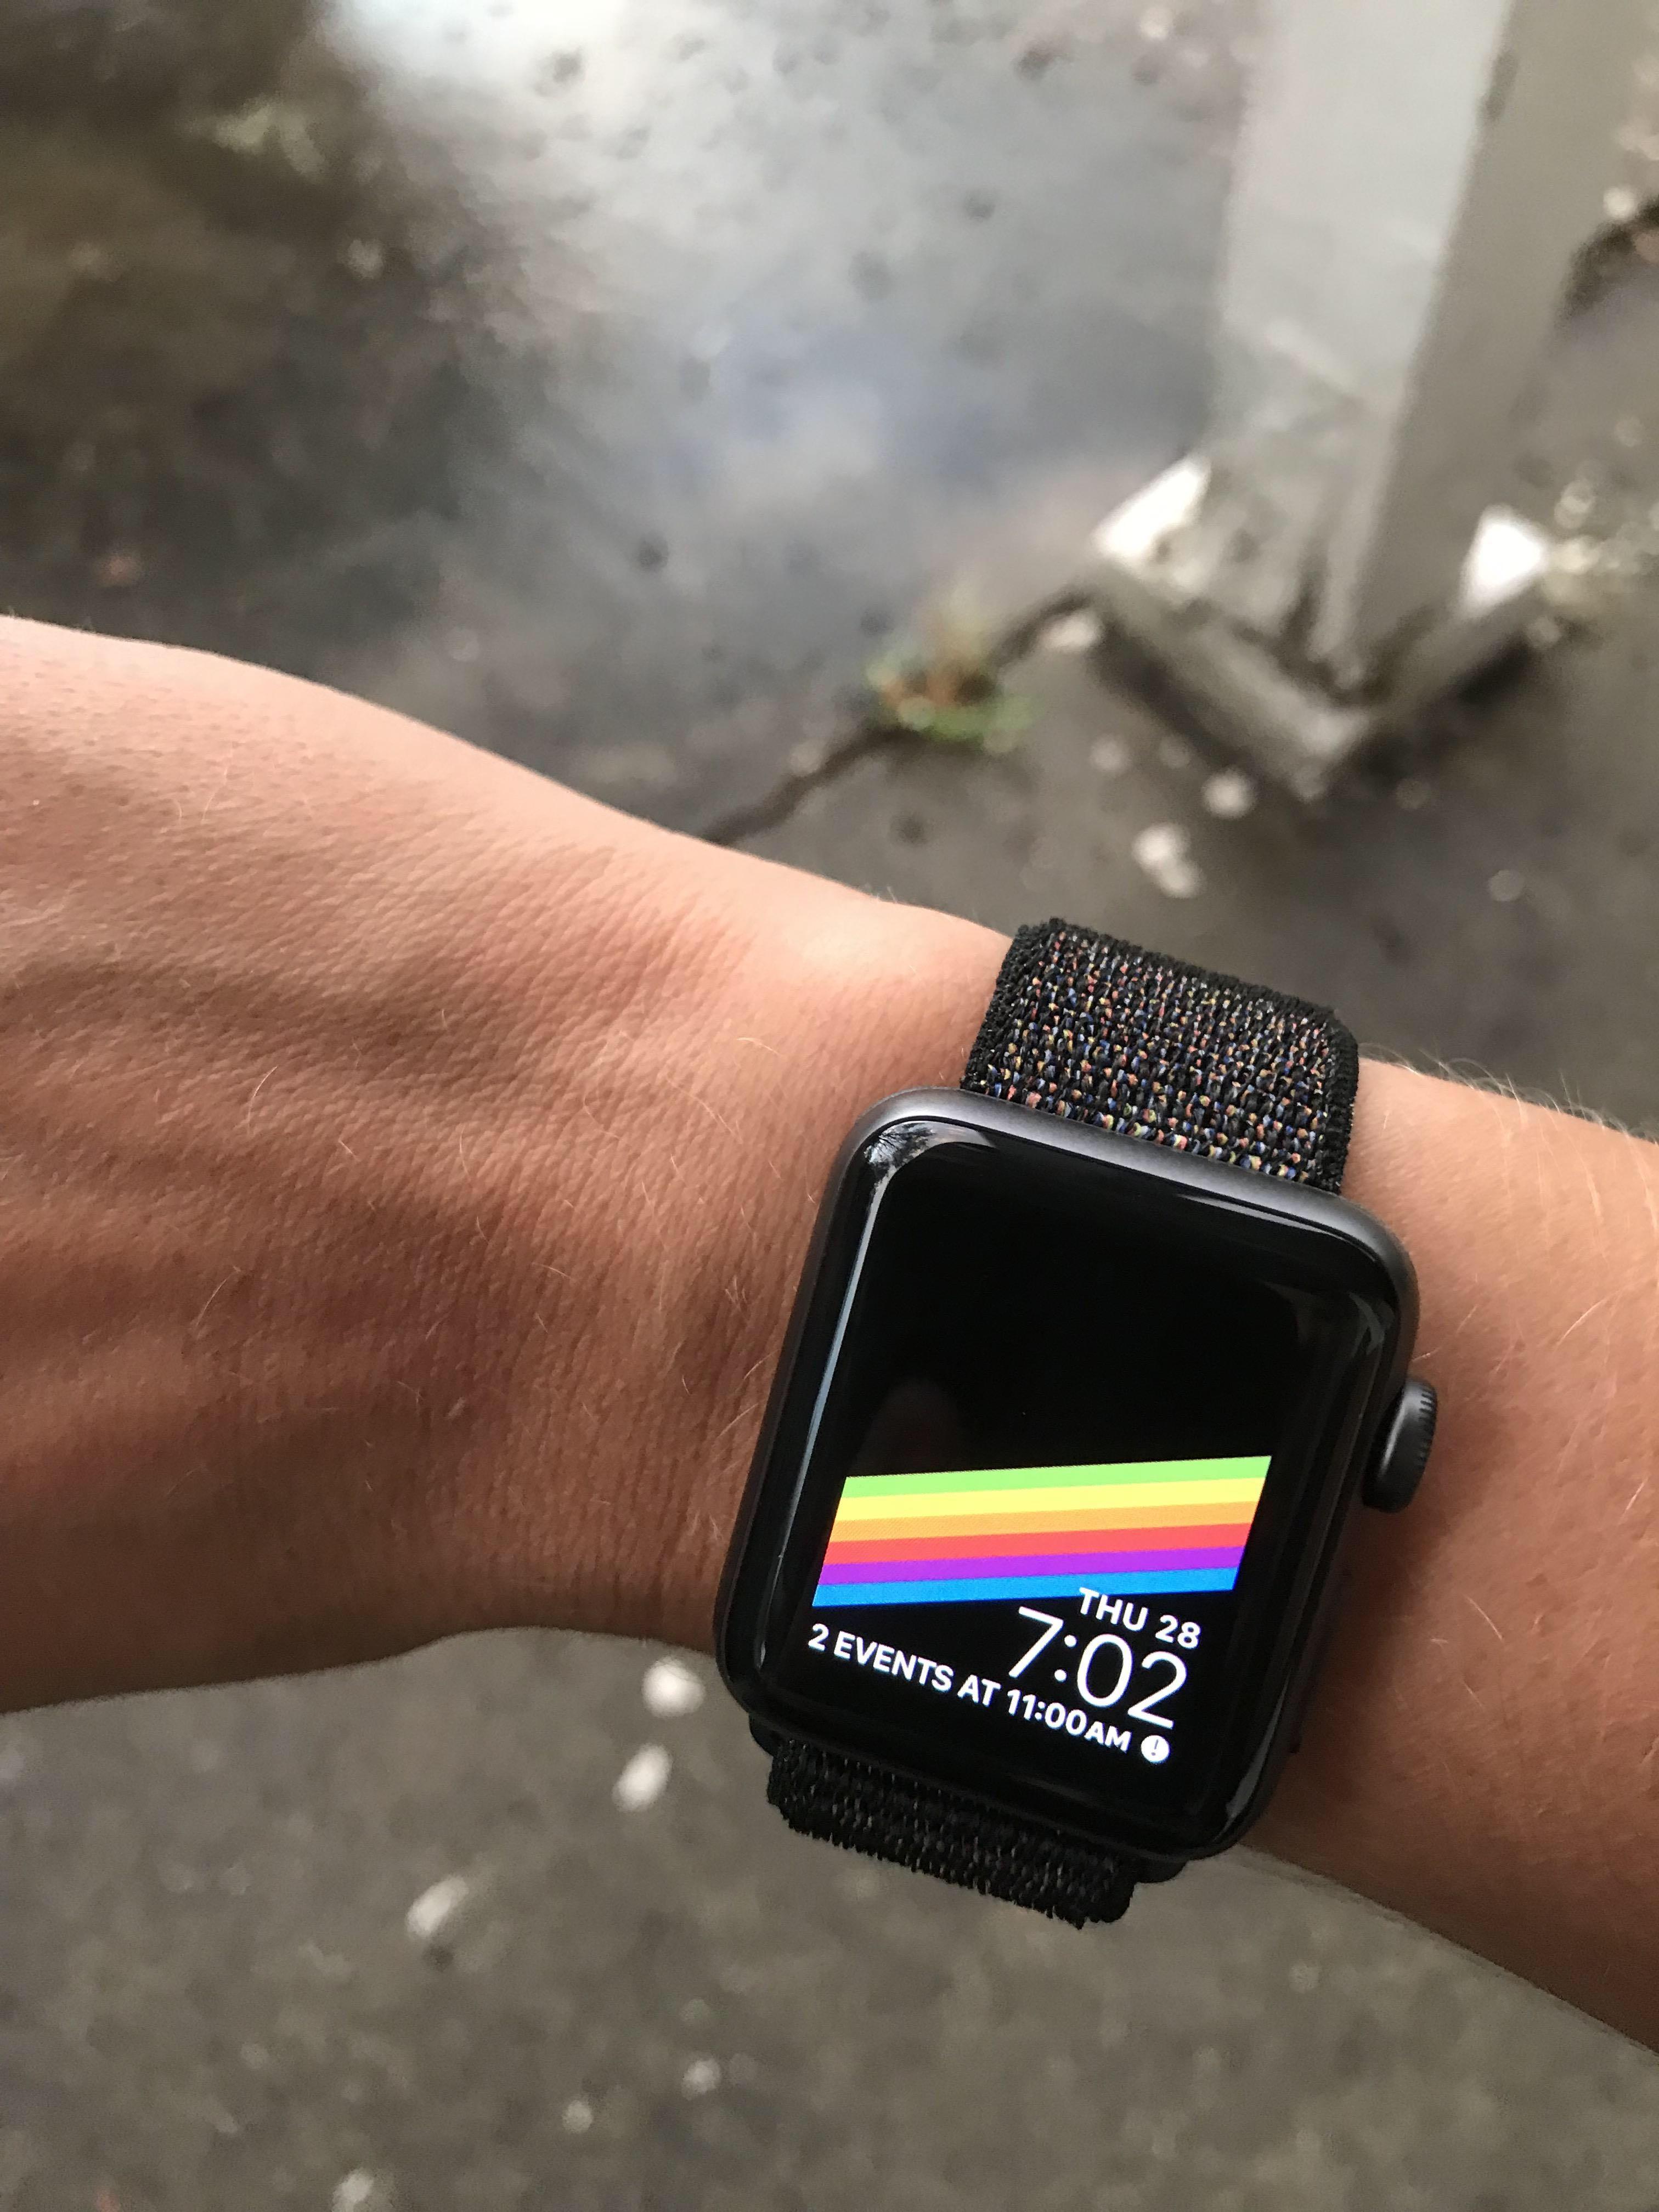 apple watch series 3 nike edition cellular